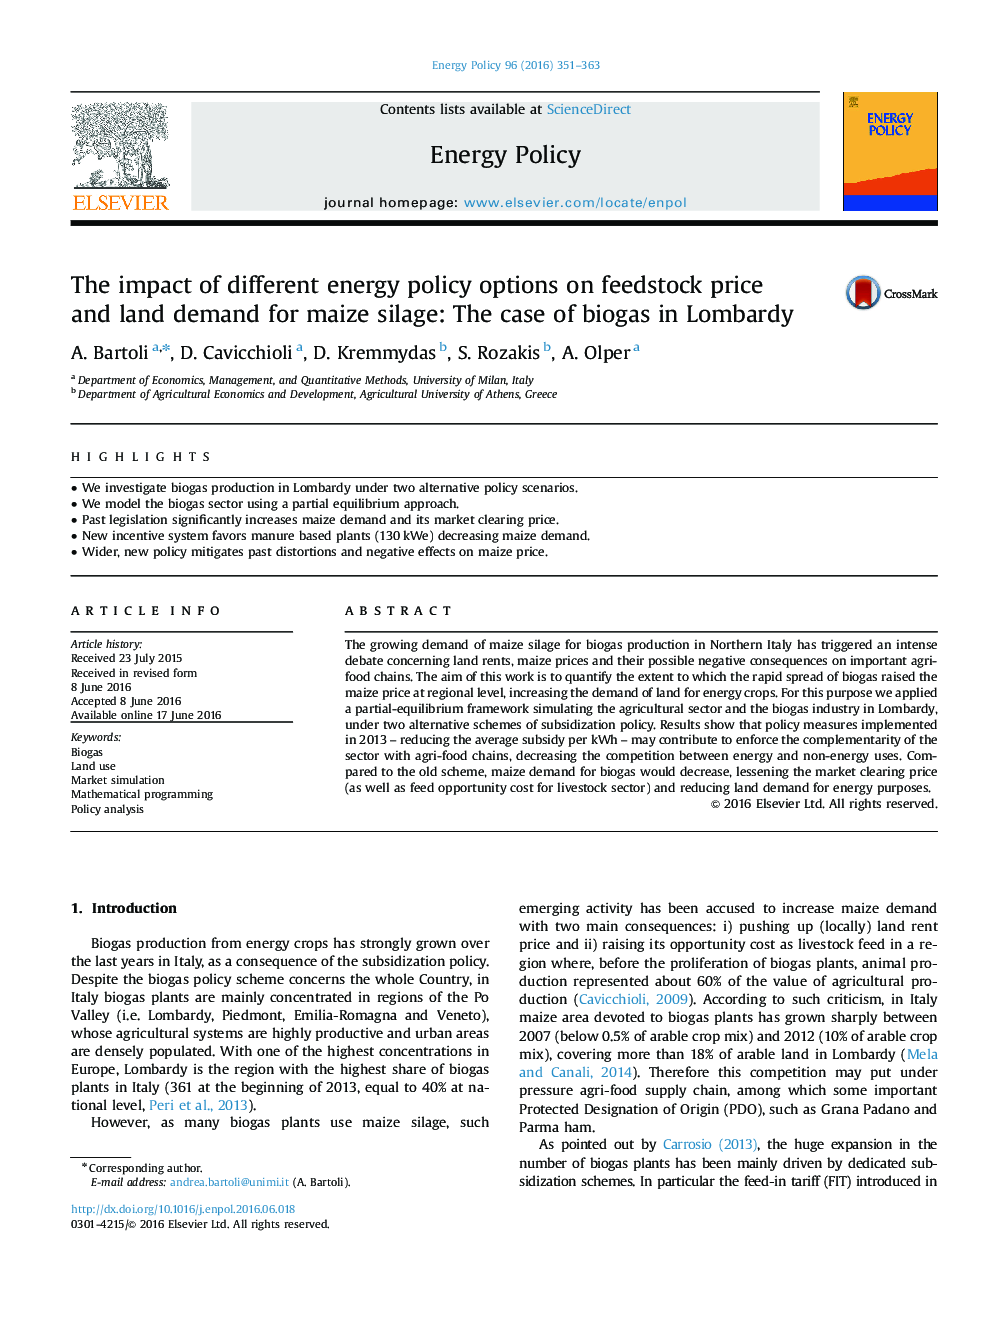 The impact of different energy policy options on feedstock price and land demand for maize silage: The case of biogas in Lombardy